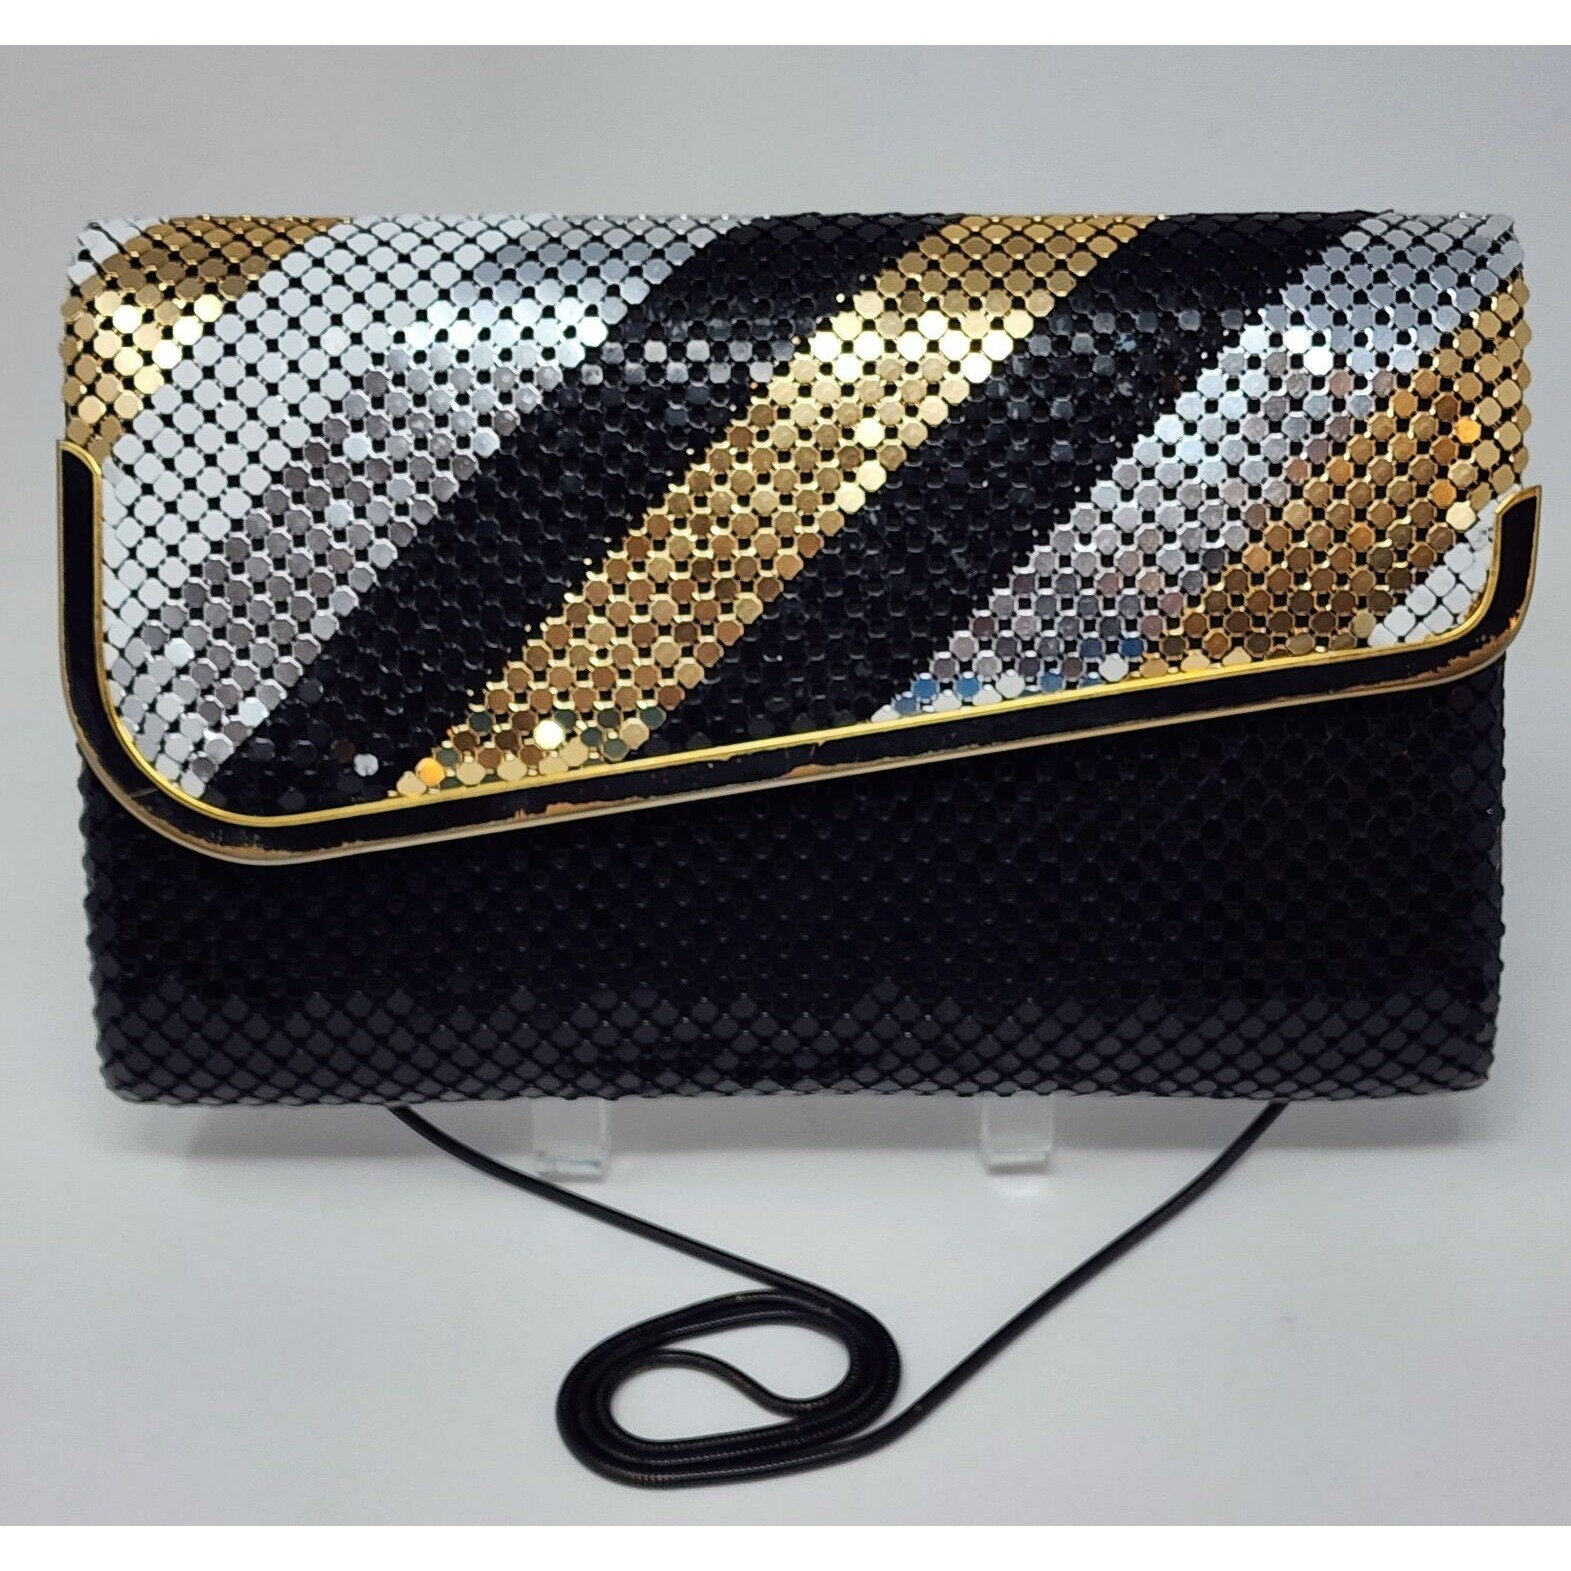 chanel bag black with gold chain